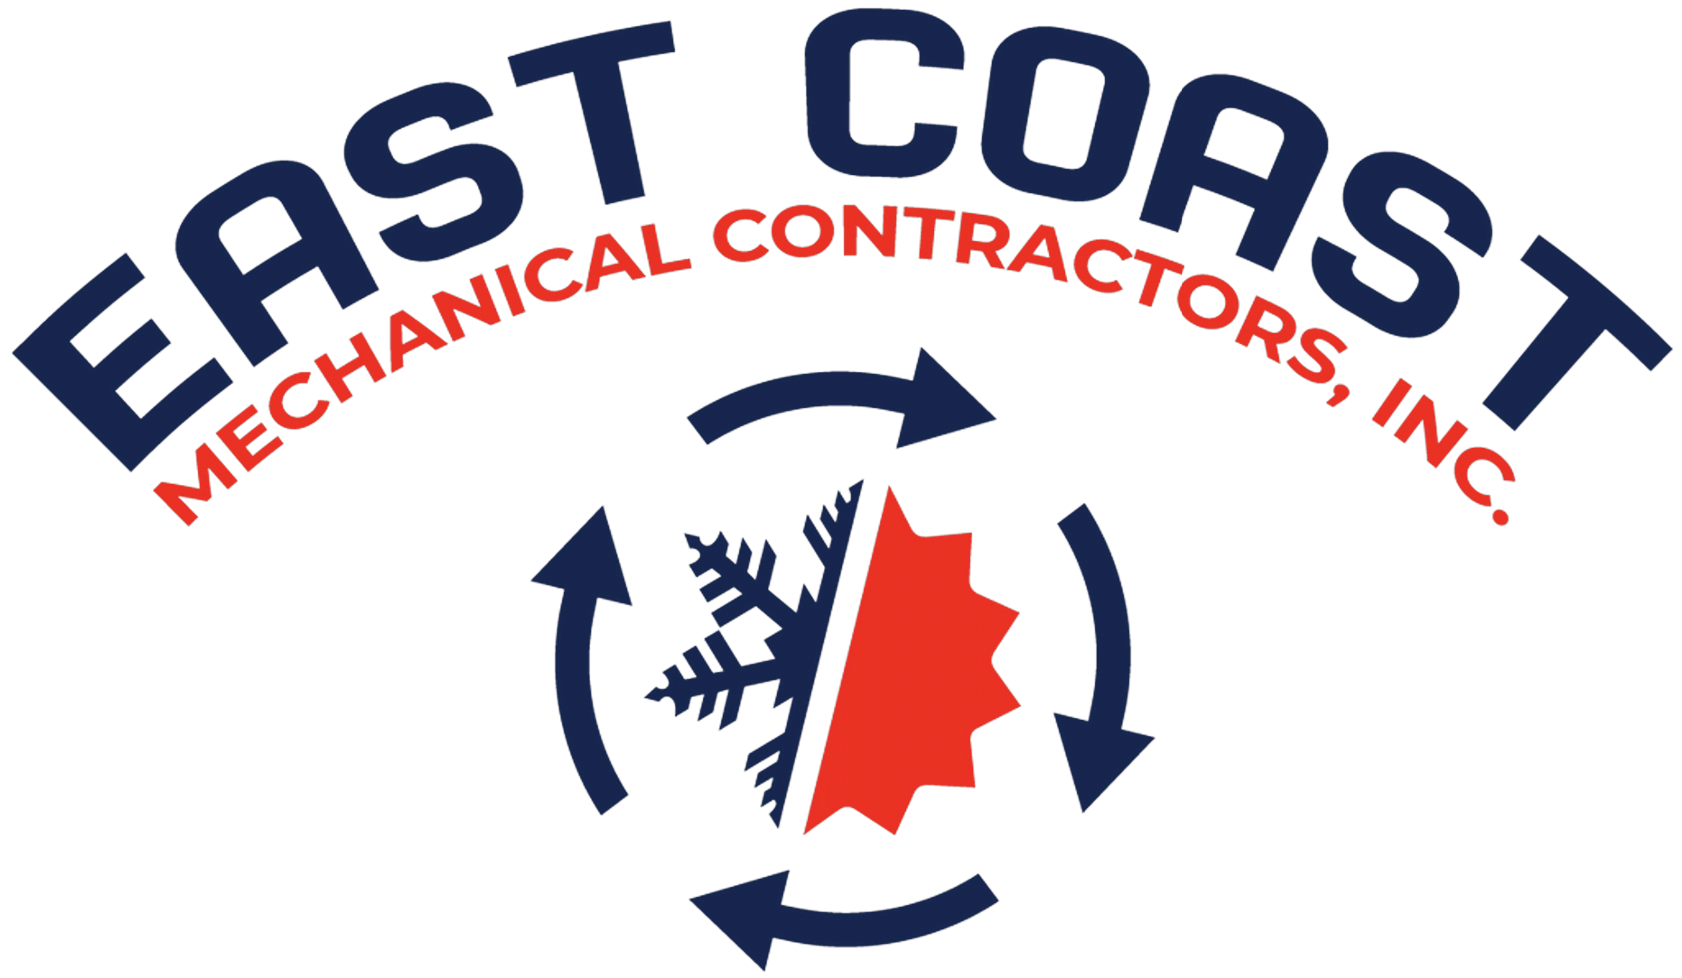 Monmouth County Residential & Commercial HVAC Specialist | East Coast Mechanical